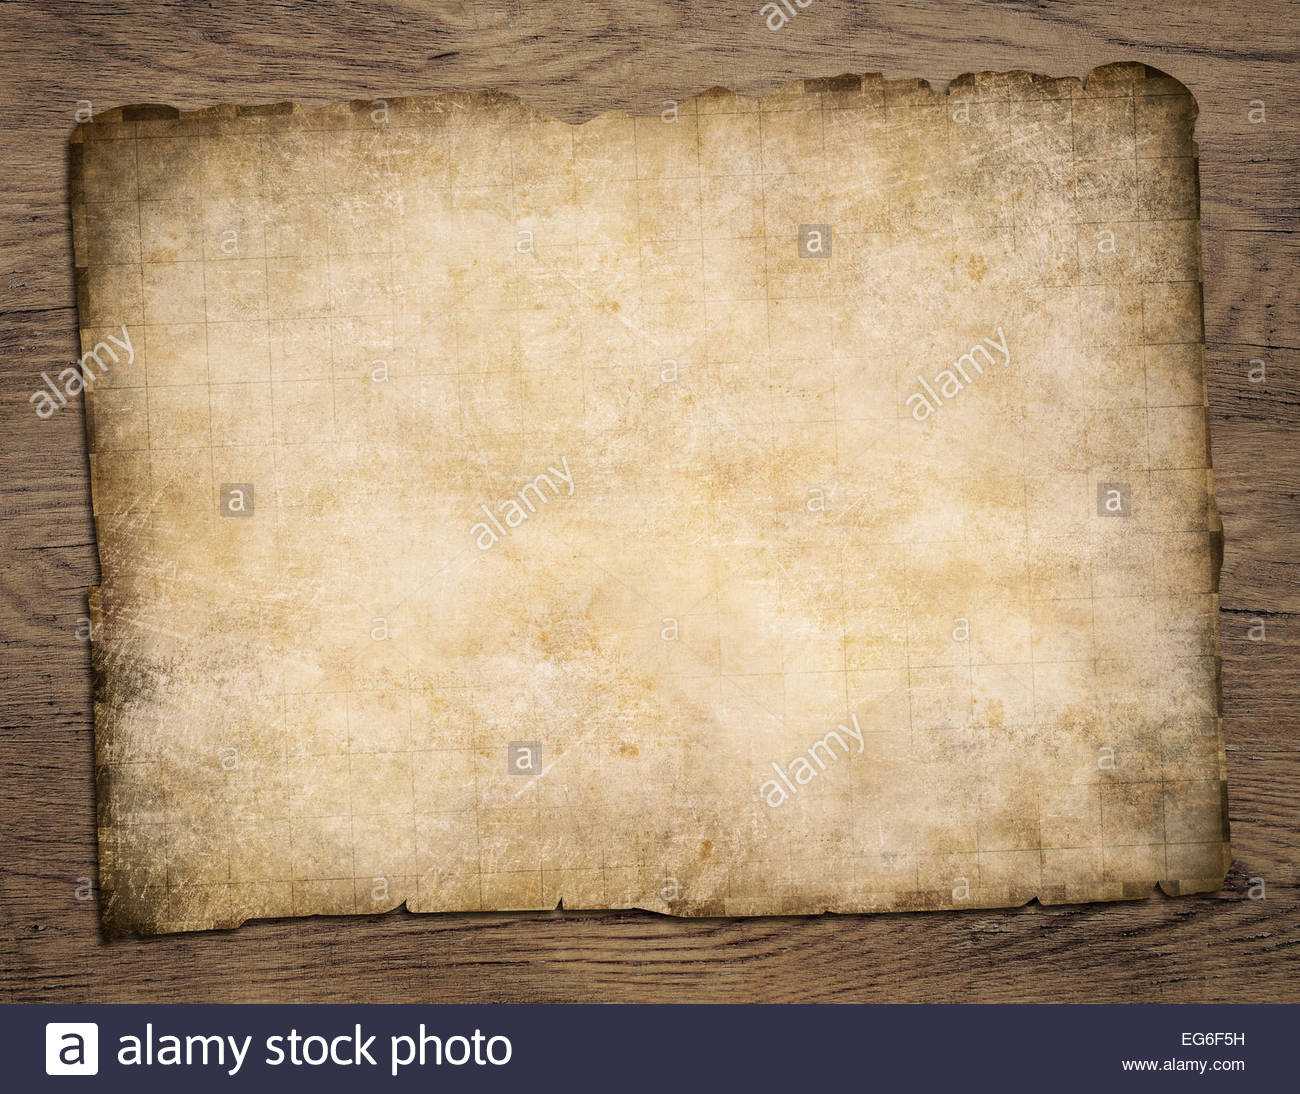 Old Blank Parchment Treasure Map On Wooden Table Stock Photo Within Blank Pirate Map Template